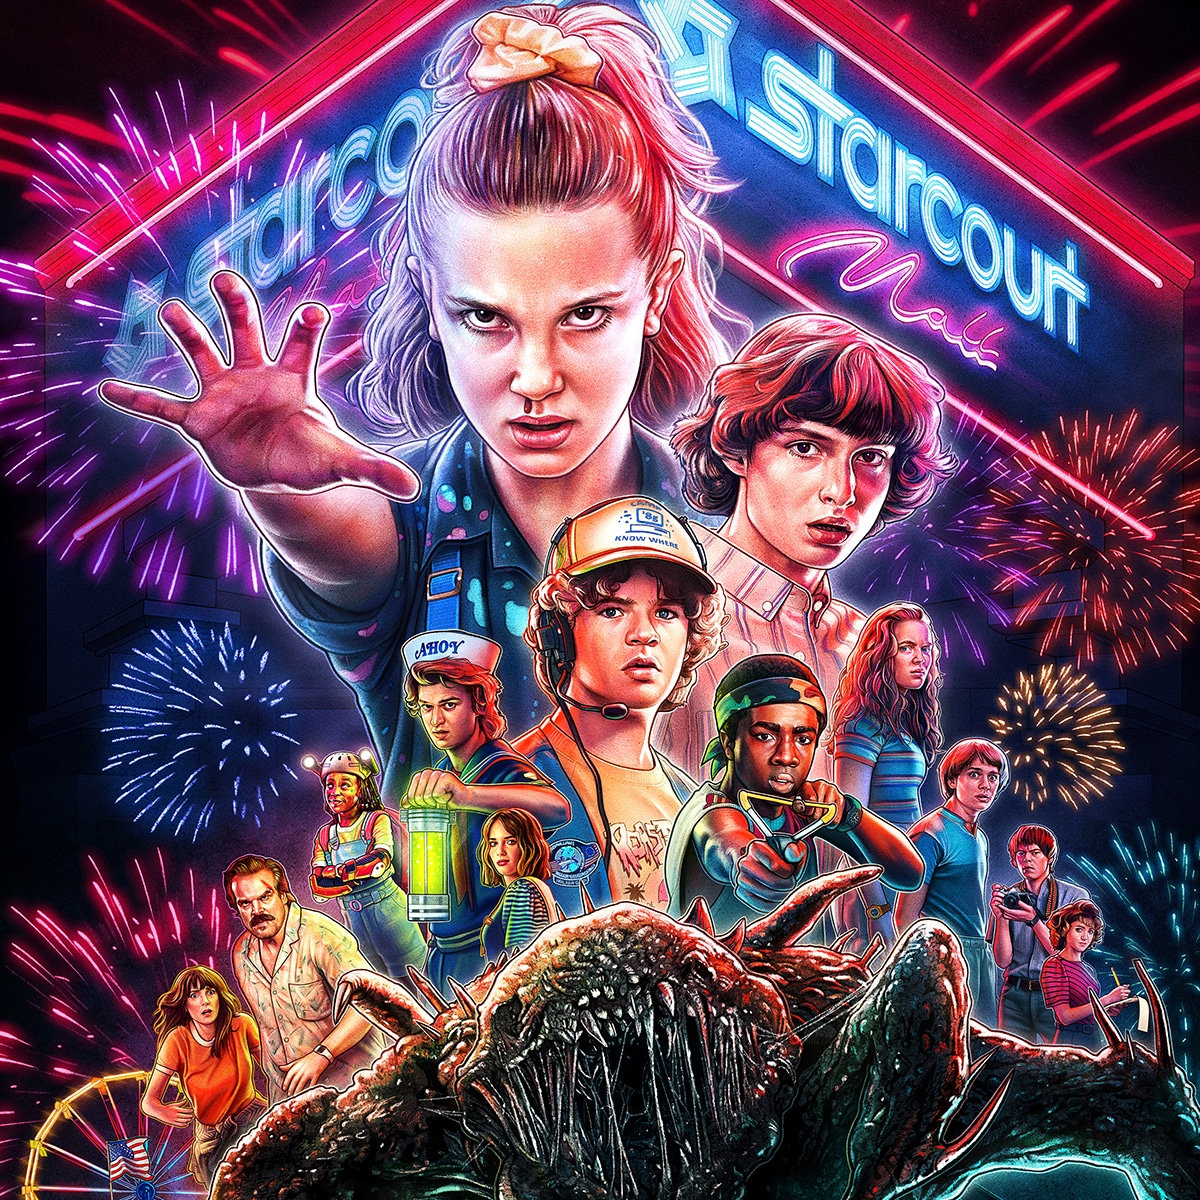 Everything We Know About Stranger Things Season 4